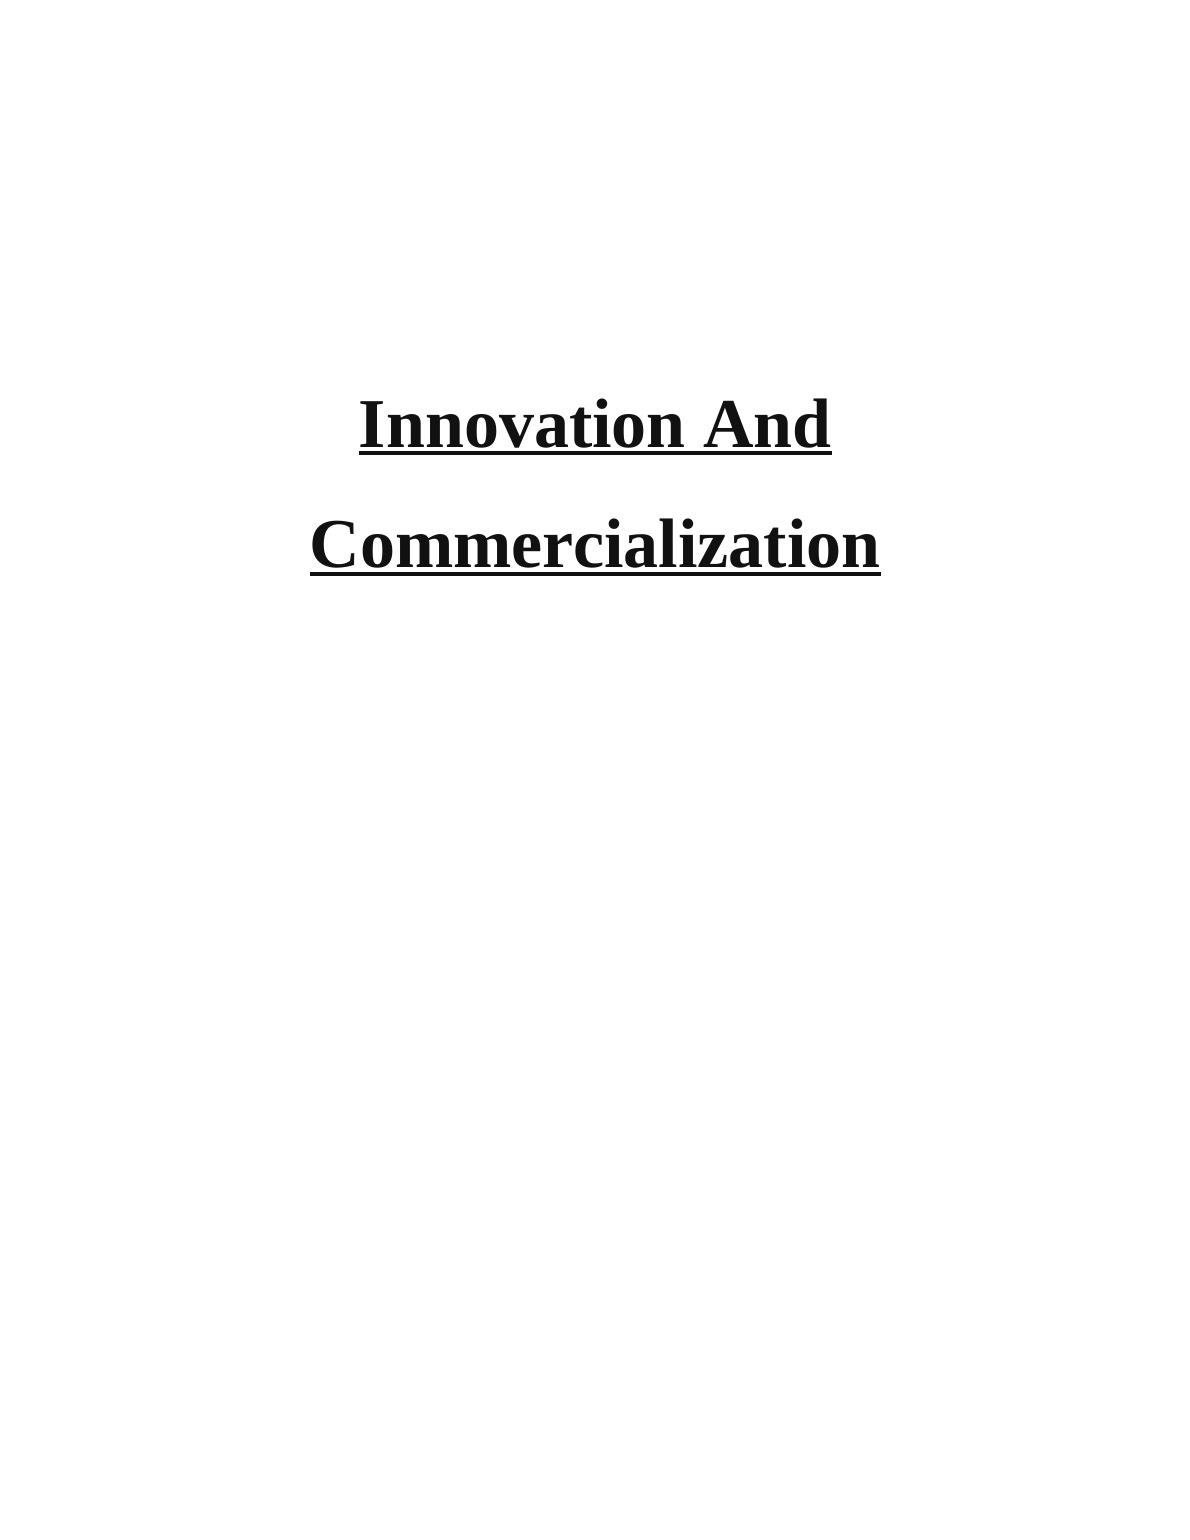 Innovation And Commercialization - Assignment Sample_1